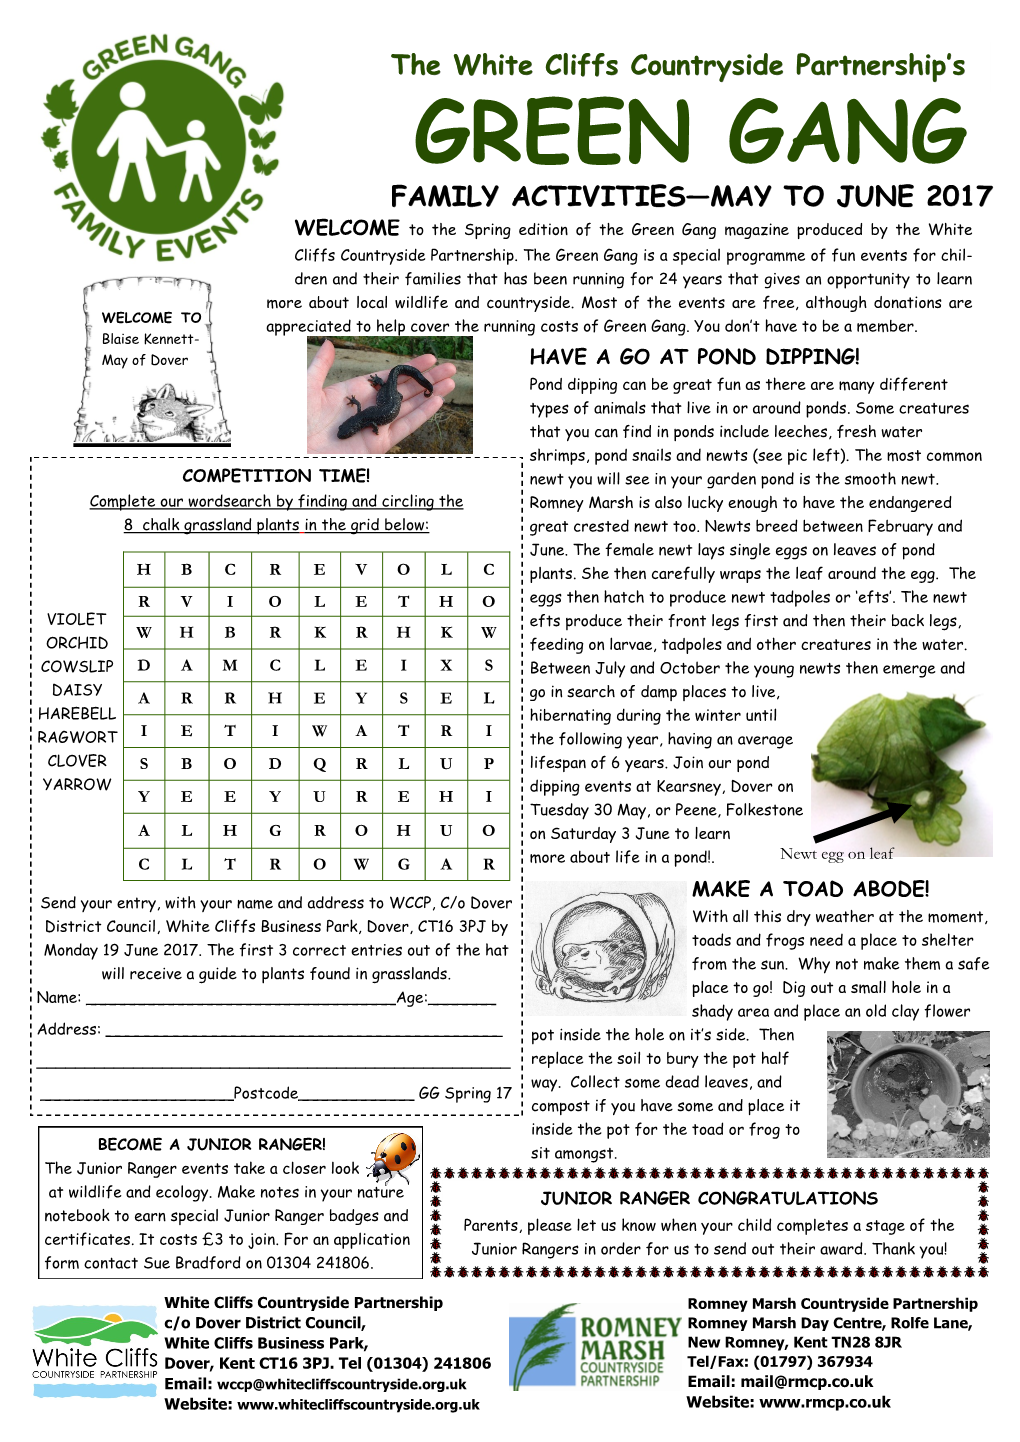 GREEN GANG FAMILY ACTIVITIES—MAY to JUNE 2017 WELCOME to the Spring Edition of the Green Gang Magazine Produced by the White Cliffs Countryside Partnership